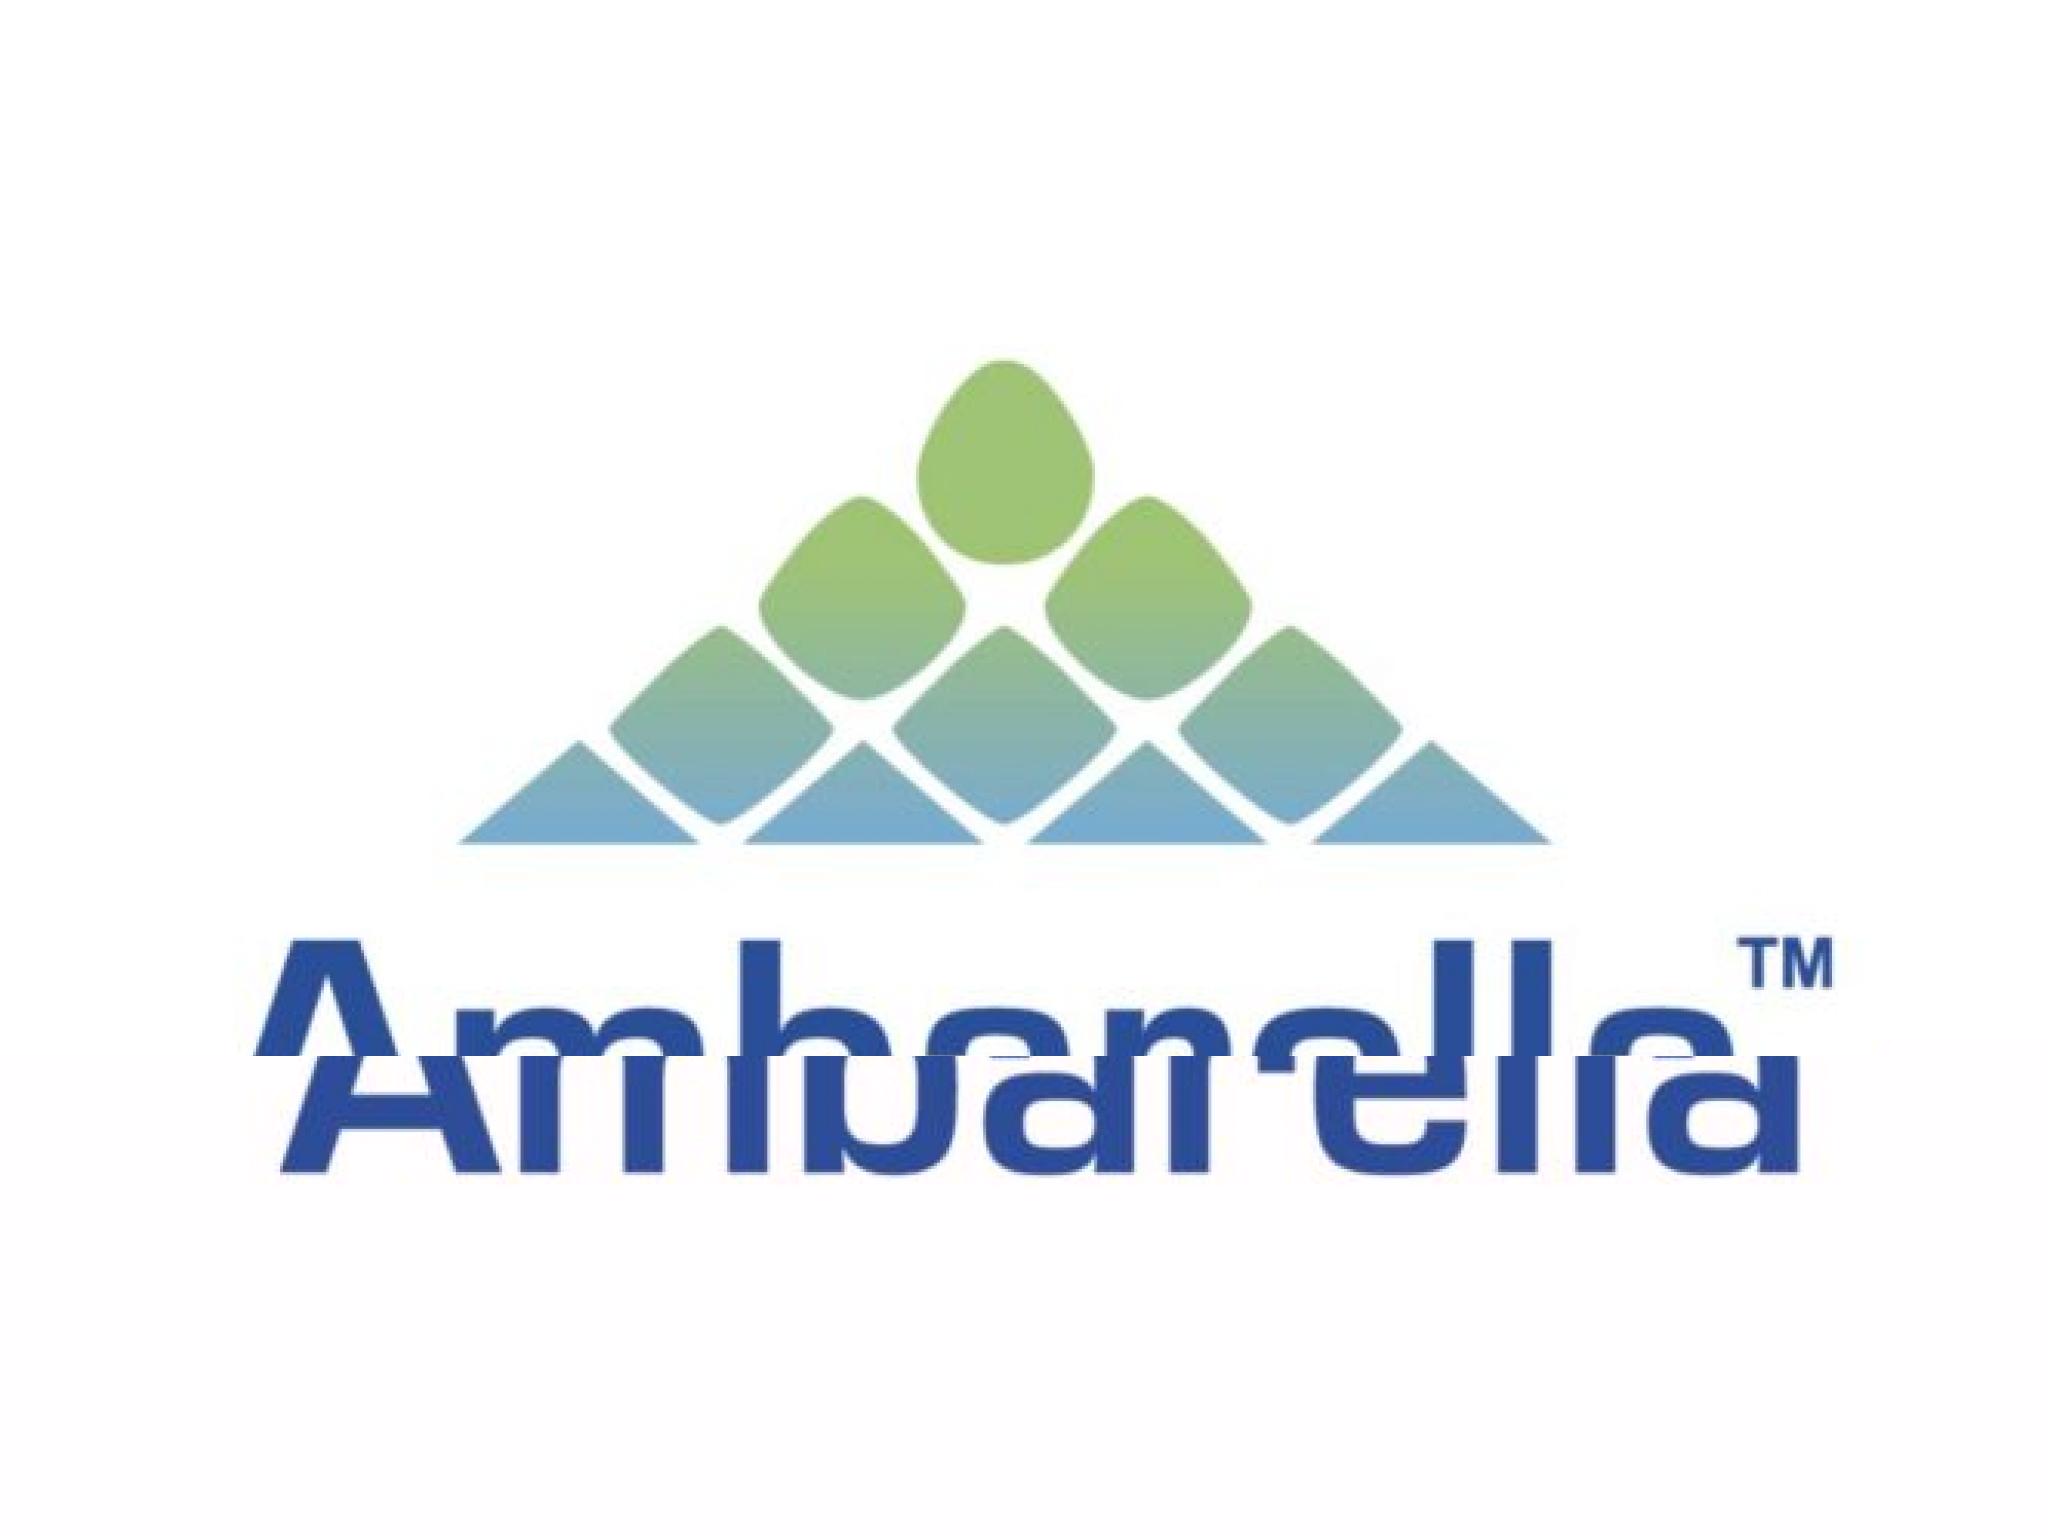  ambarella-posts-upbeat-results-joins-gap-pagerduty-elastic-and-other-big-stocks-moving-higher-on-friday 